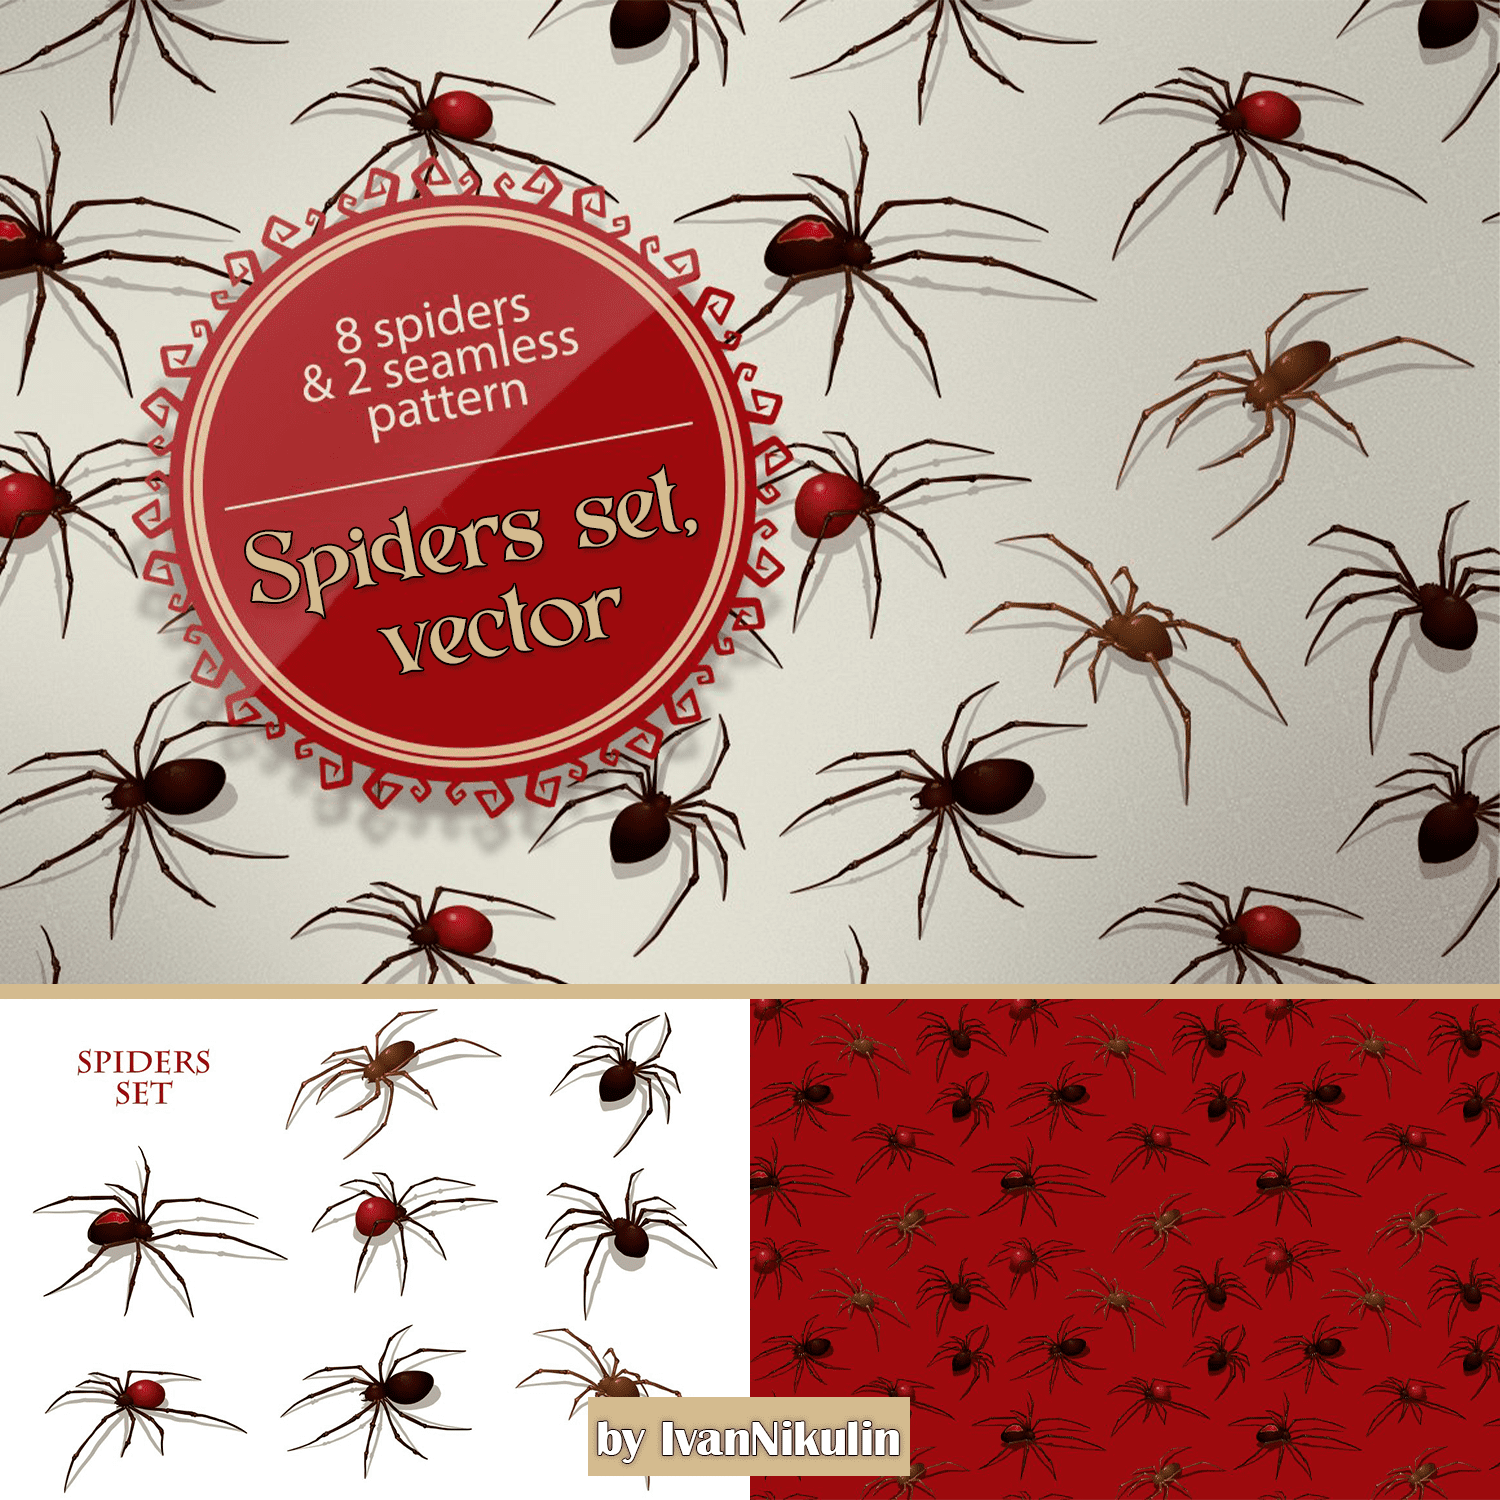 Spiders set, vector cover.